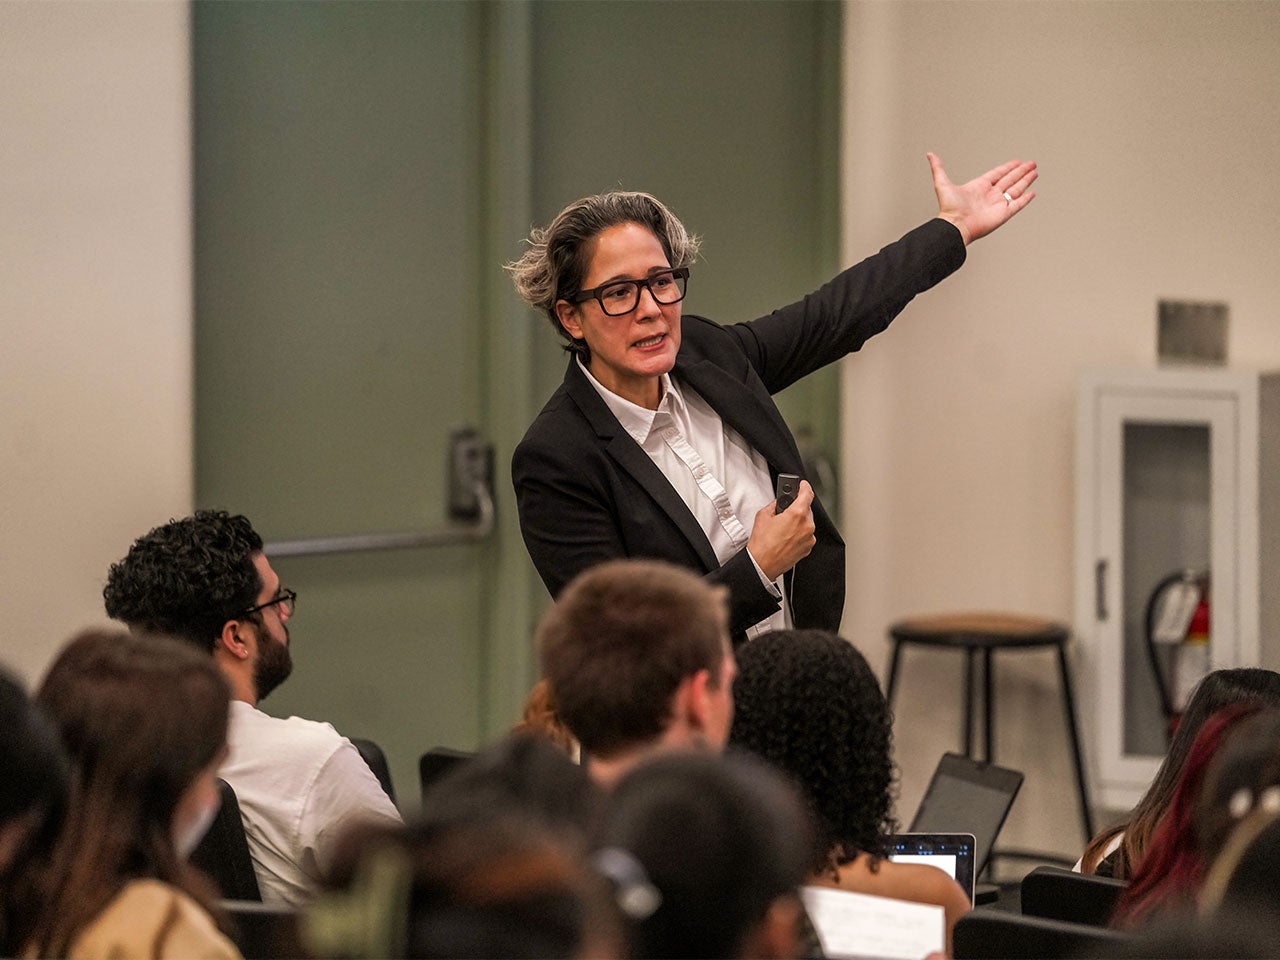 A professor with short gray hair, wearing square-rimmed glasses and a black blazer points to a presentation slide off-camera while teaching an art history class at ˽̳ Davis.